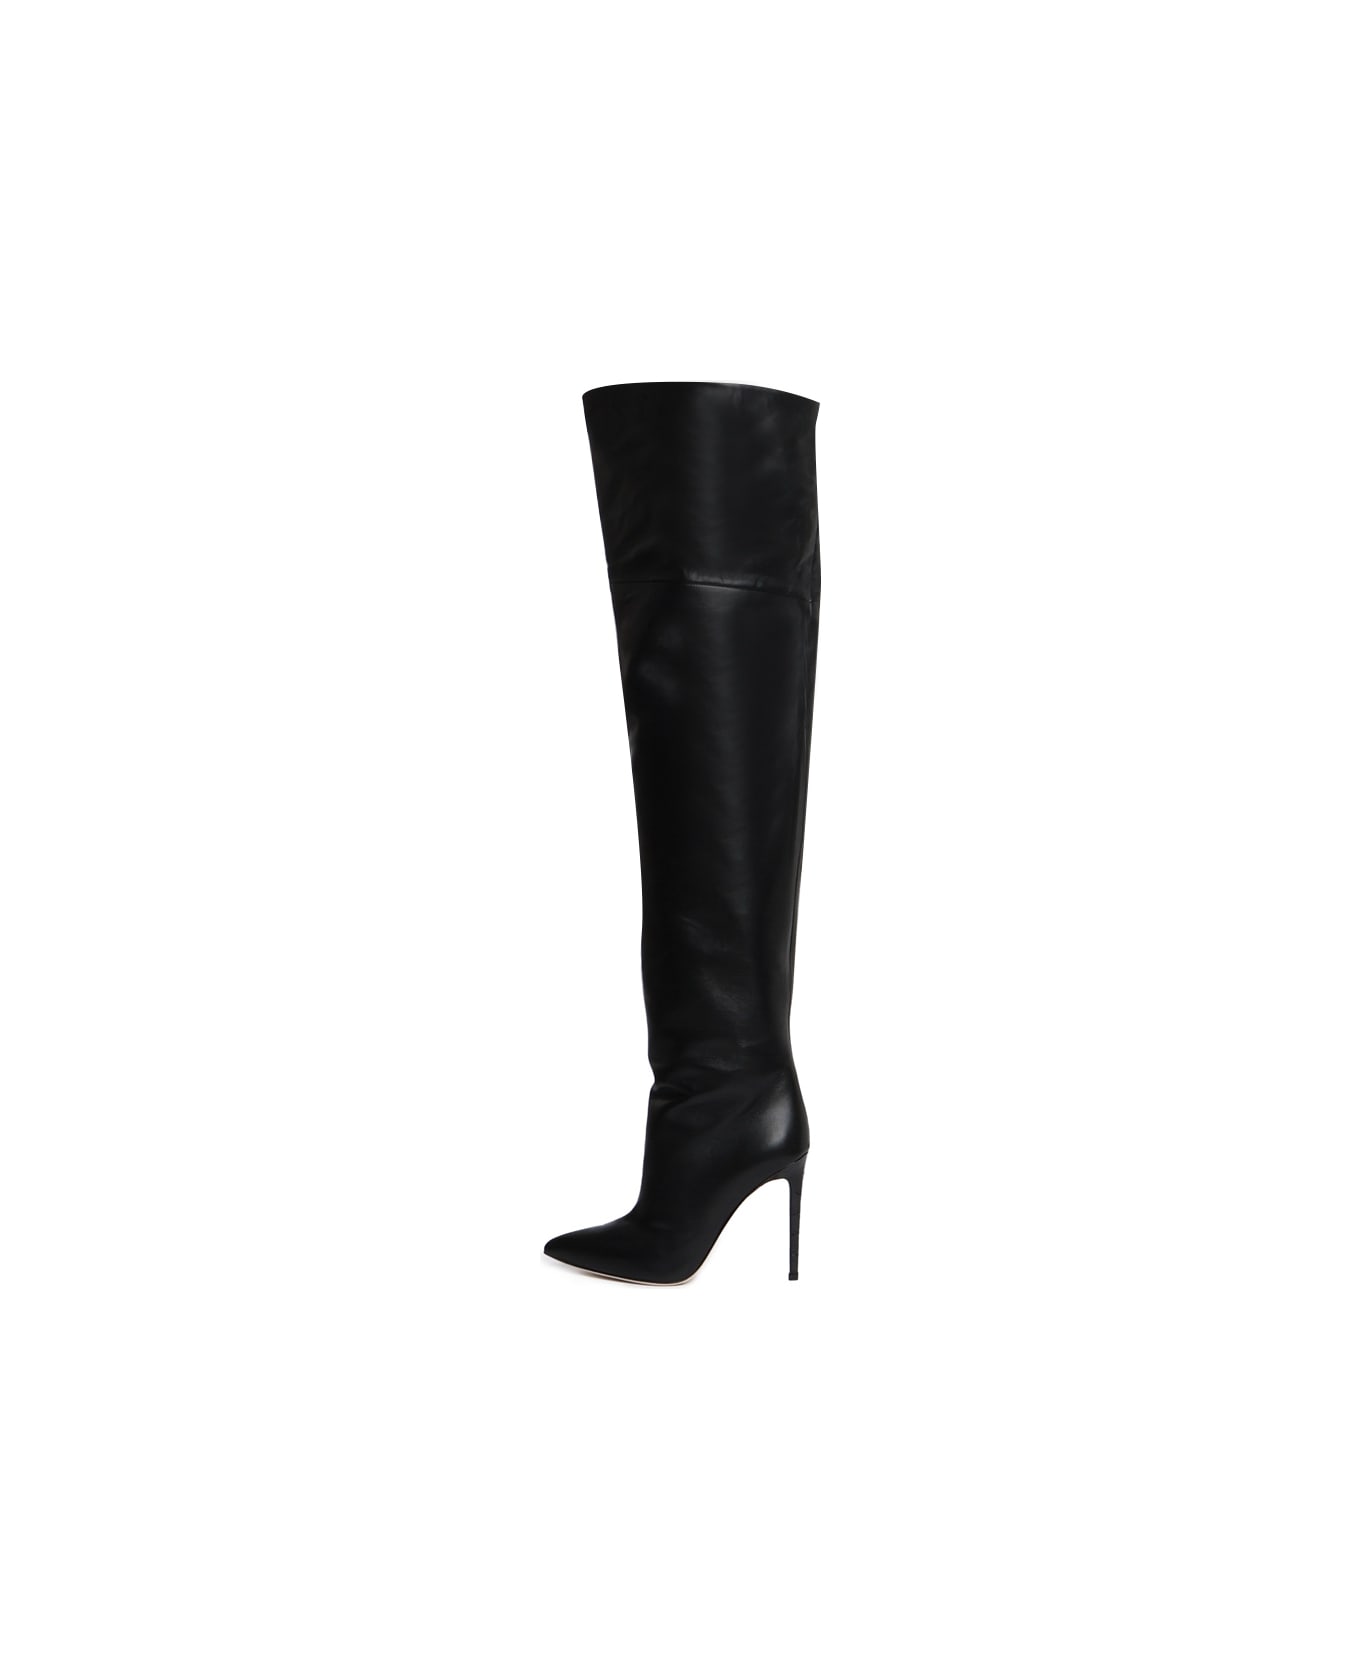 Paris Texas 115mm Over The Knee Boots - Black